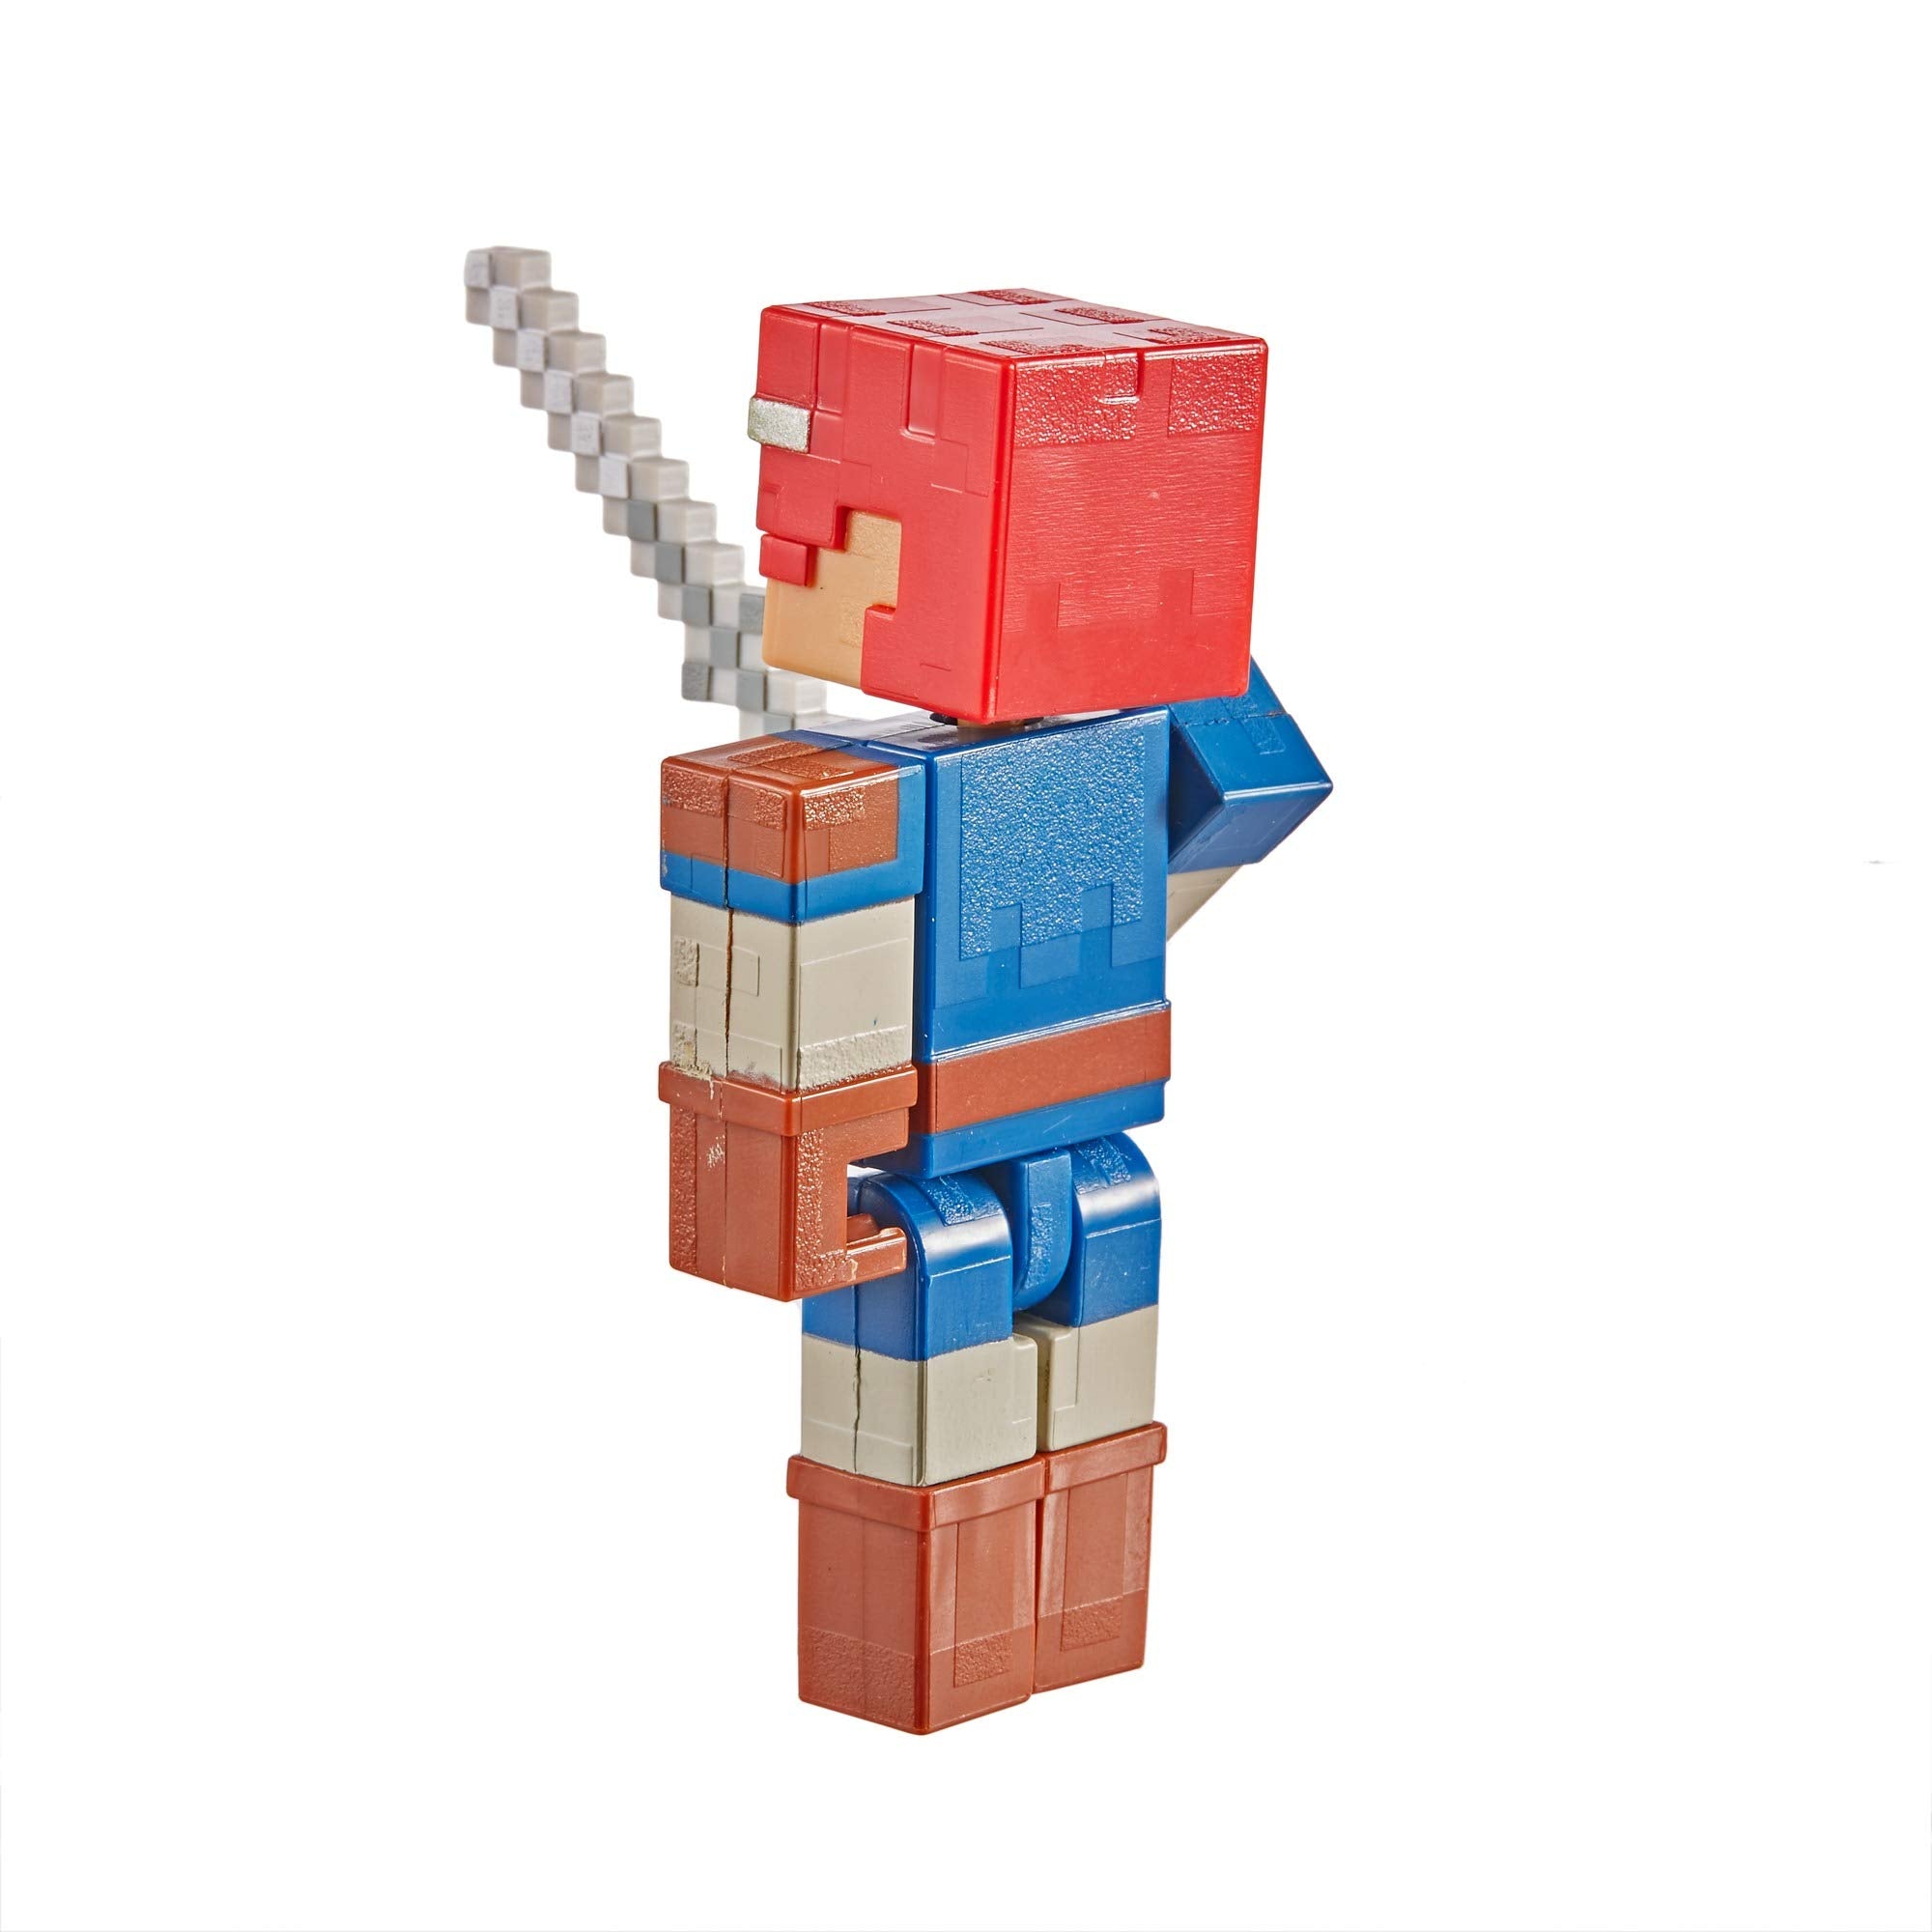 Minecraft Dungeons 3.25-in Valorie Collectible Battle Figure and Accessories, Based on Video Game, Imaginative Story Play Gift for Boys and Girls Age 6 and Older